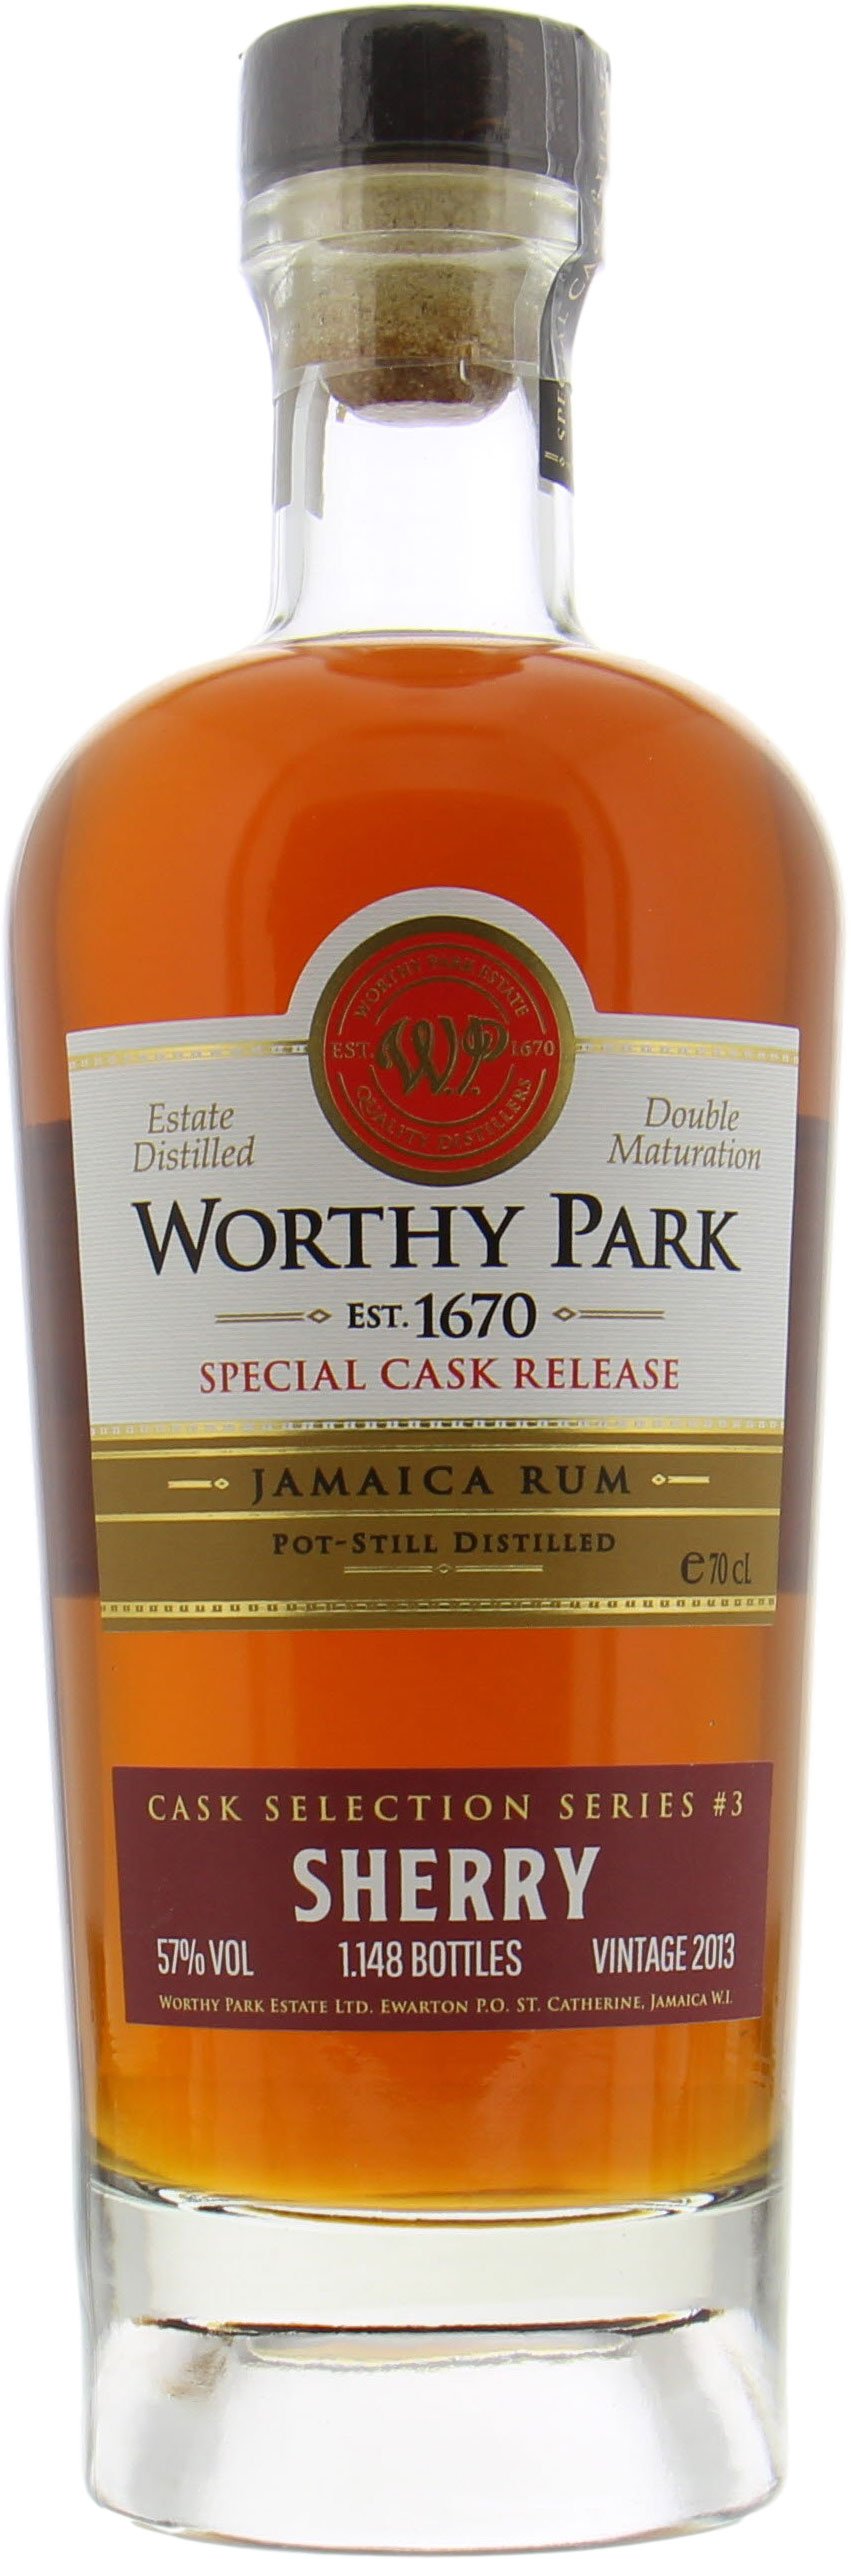 Worthy Park - Single Estate Sherry Cask Selection 57% 2013 Perfect